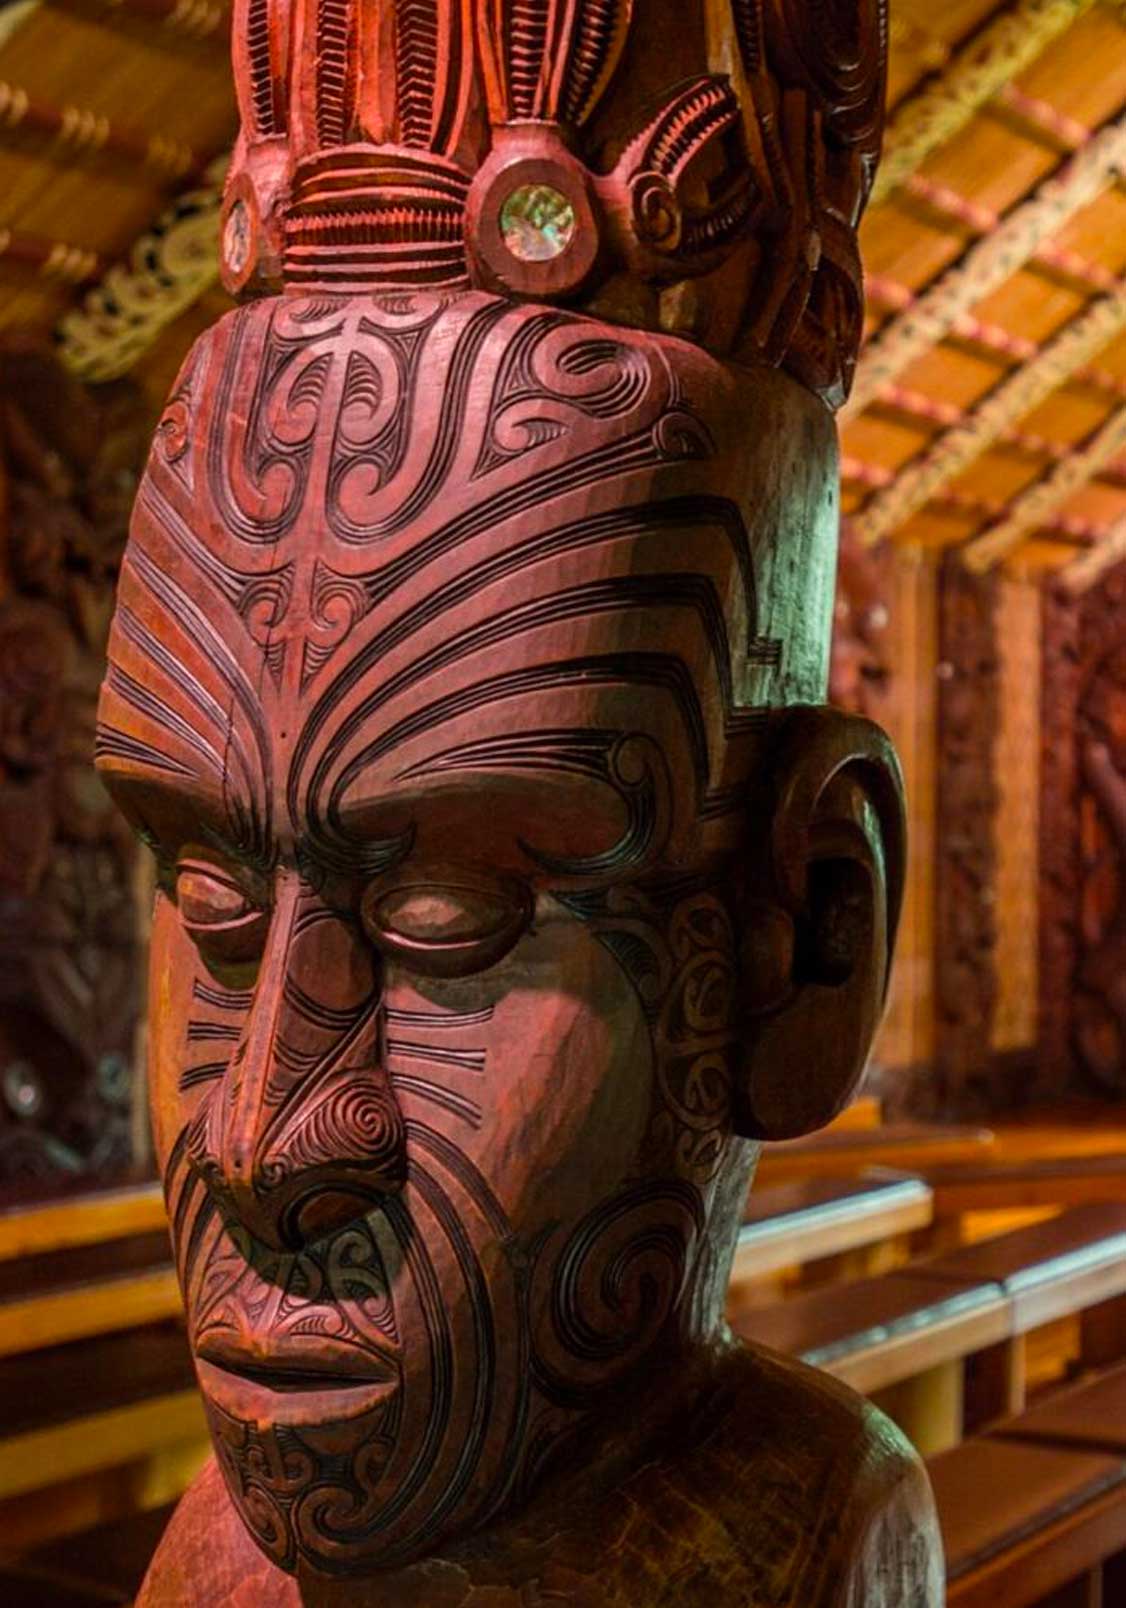 Close-up of one of the sculptures at the Waitangi Treaty Grounds in New Zealand.